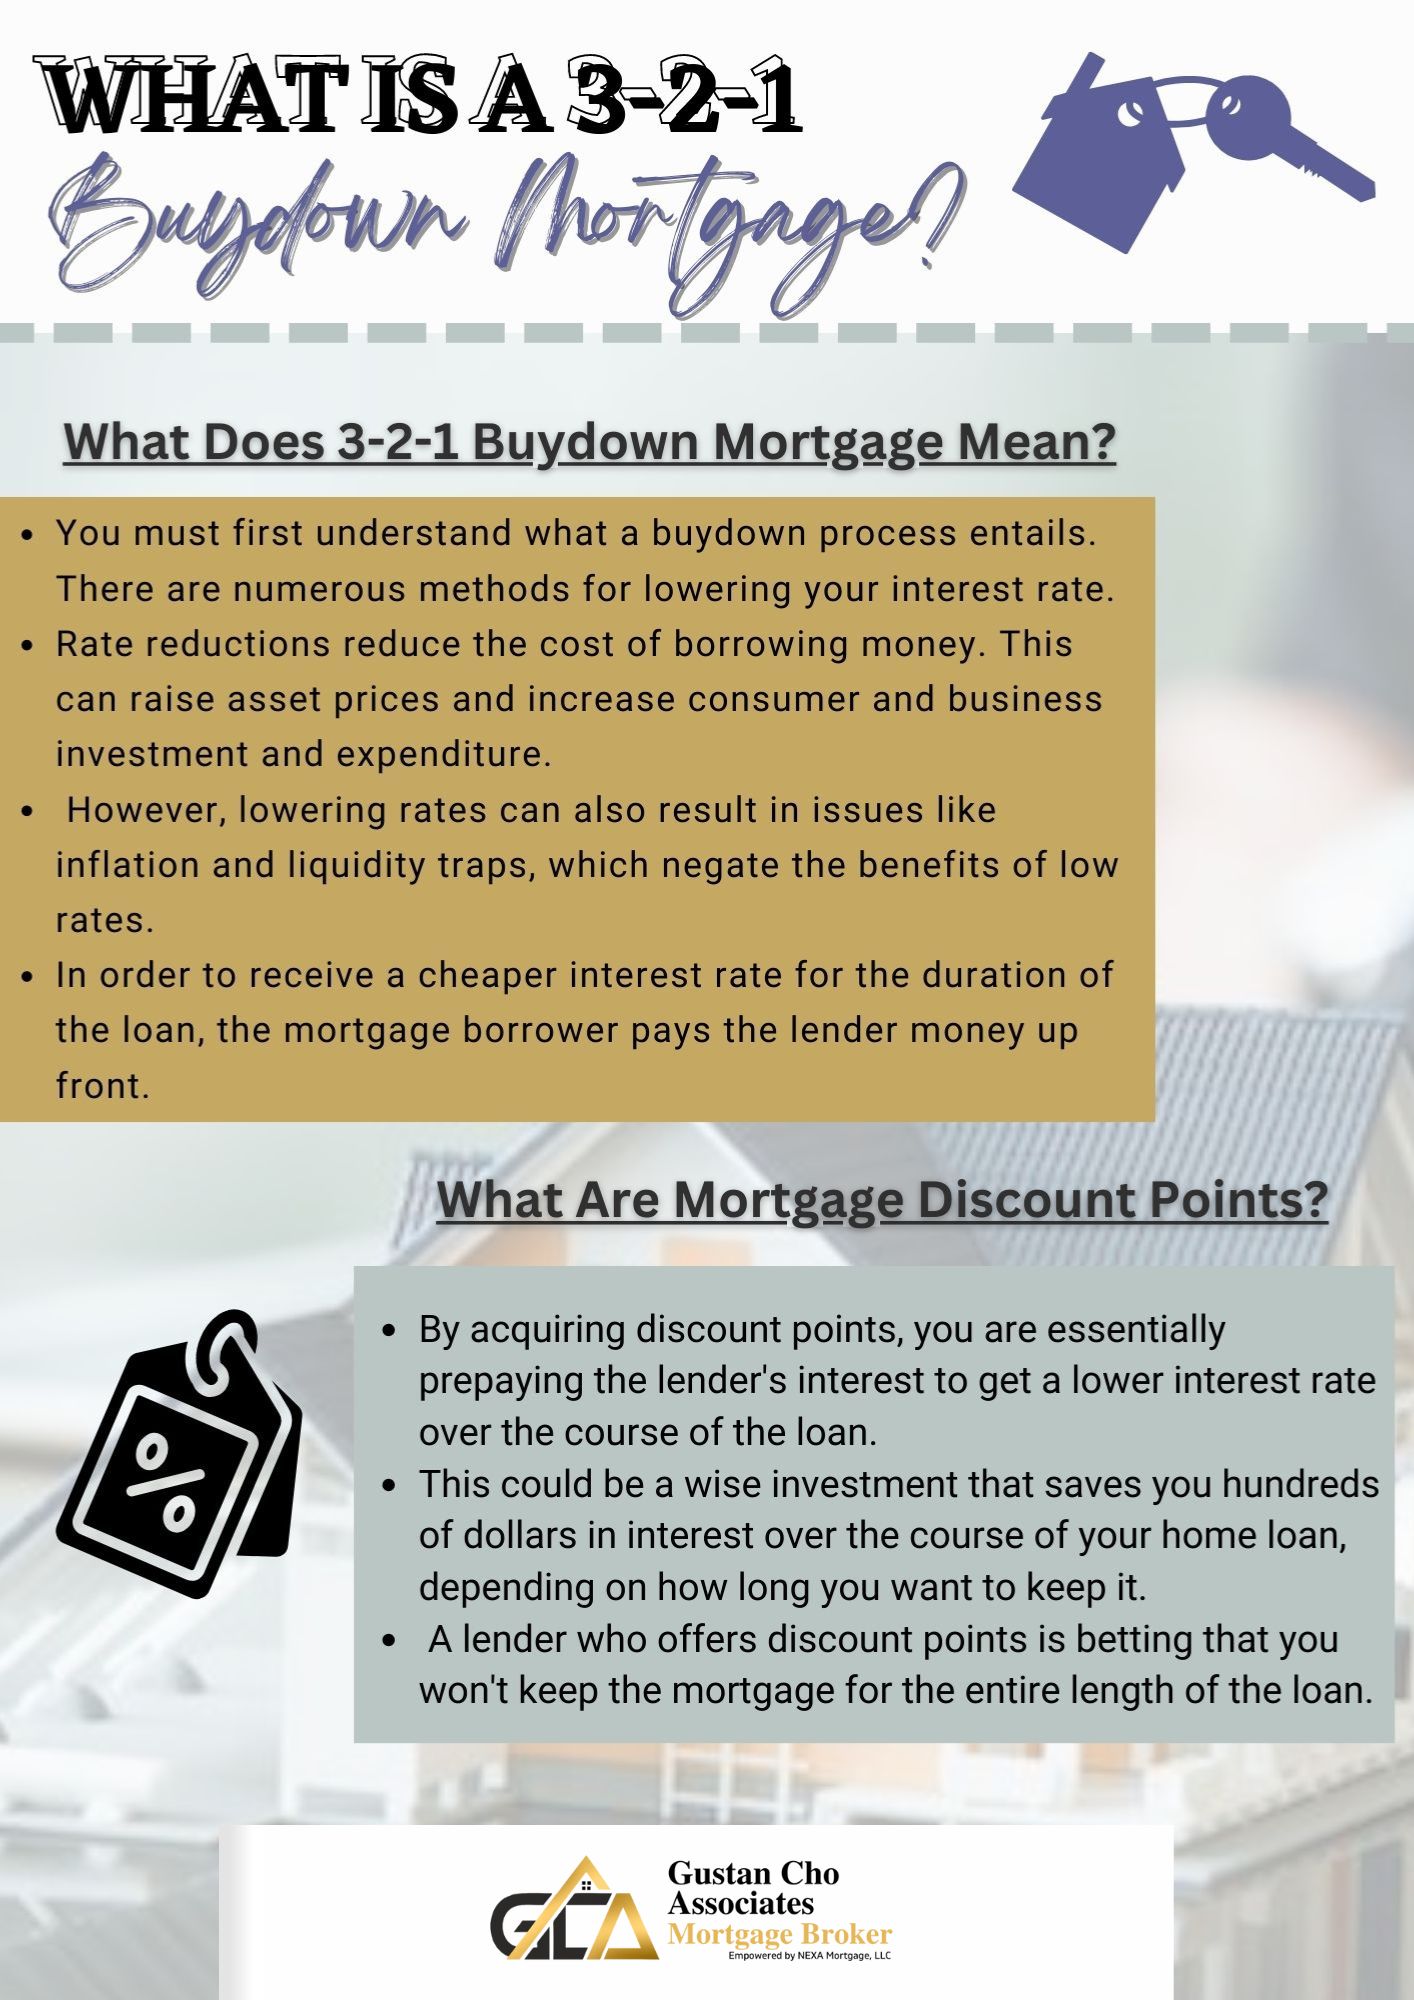 What Does 3-2-1 Buydown Mortgage Mean